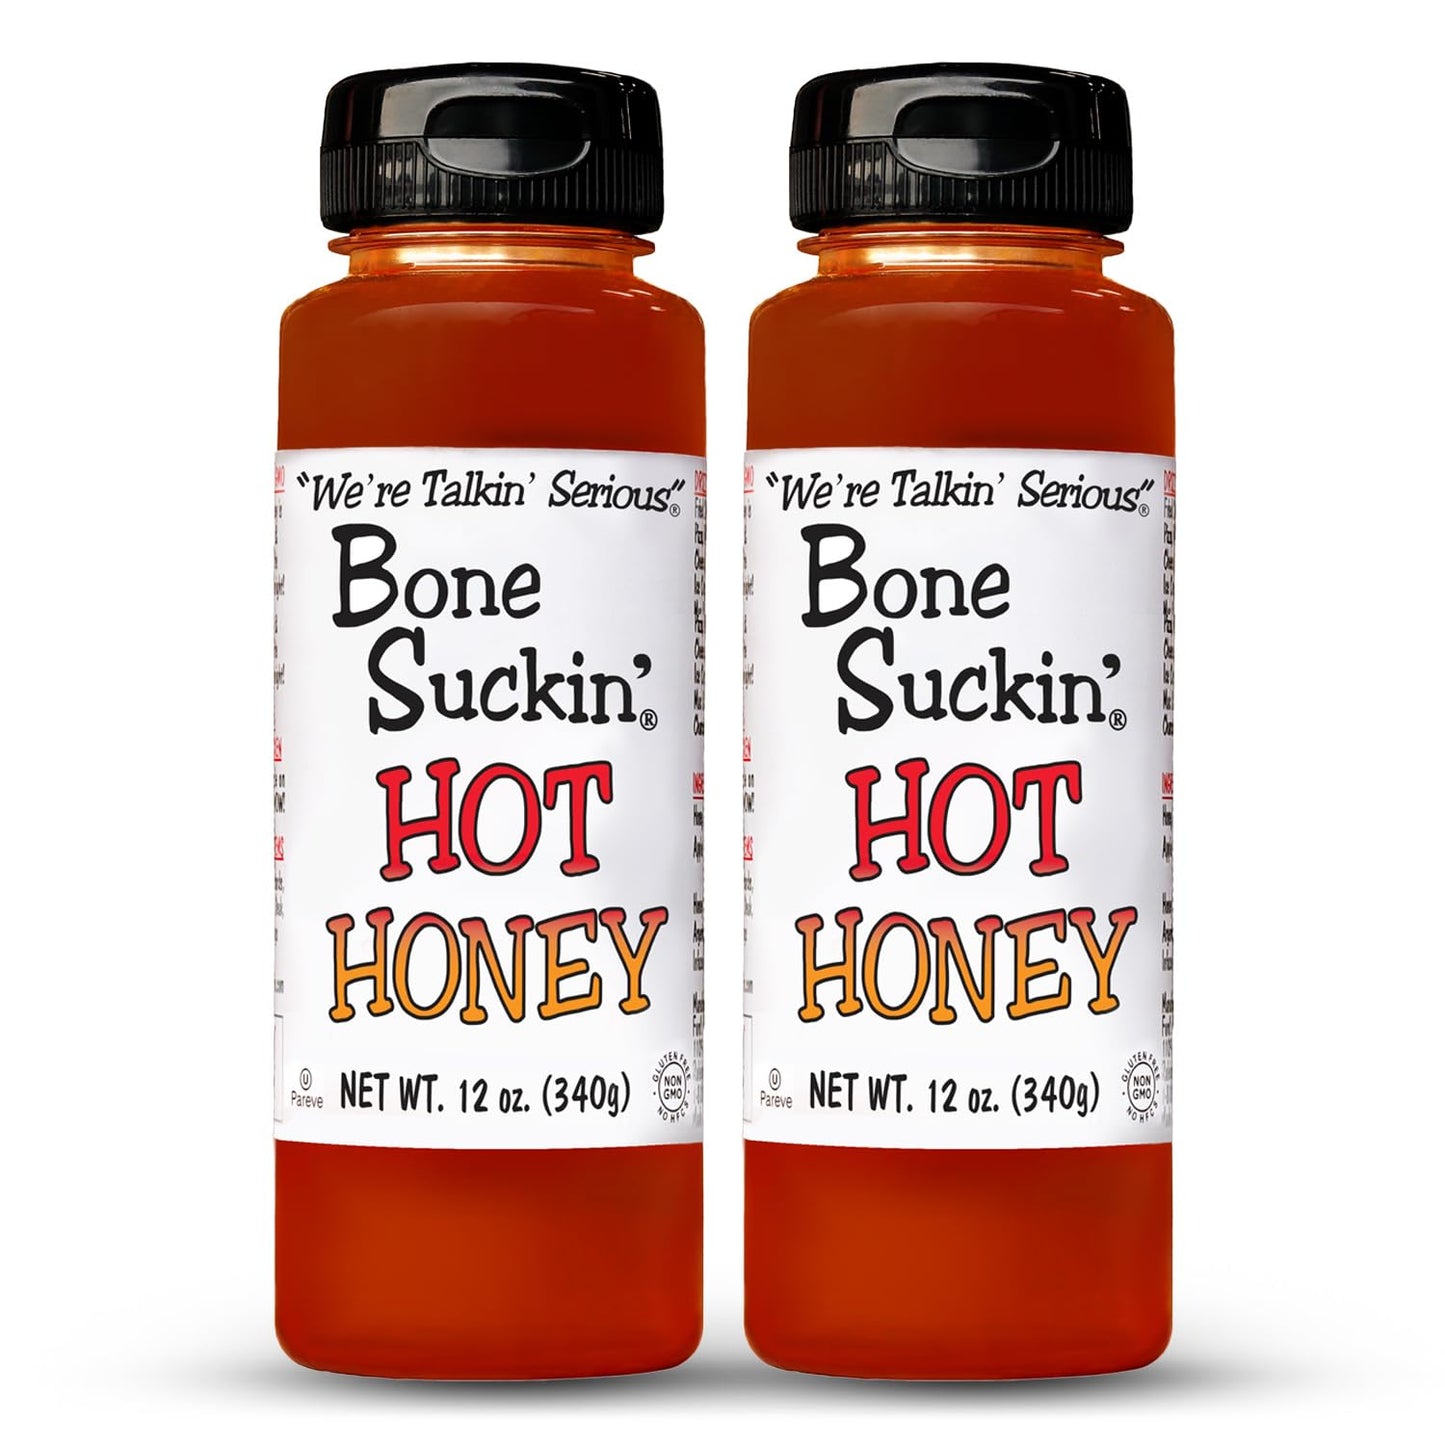 Bone Suckin' Hot Honey, 12 oz, 2 pack HIGH-QUALITY INGREDIENTS: Made with high-quality Non Gmo, Kosher, Pareve, Gluten Free, Dairy Free ingredients with No High Fructose Syrup: Bone Suckin' Hot Honey is crafted using the perfect blend of high quality honey, apple cider vinegar, and chili extract, ensuring a delicious sweet, hot & flavorful experience that is great for the whole family!